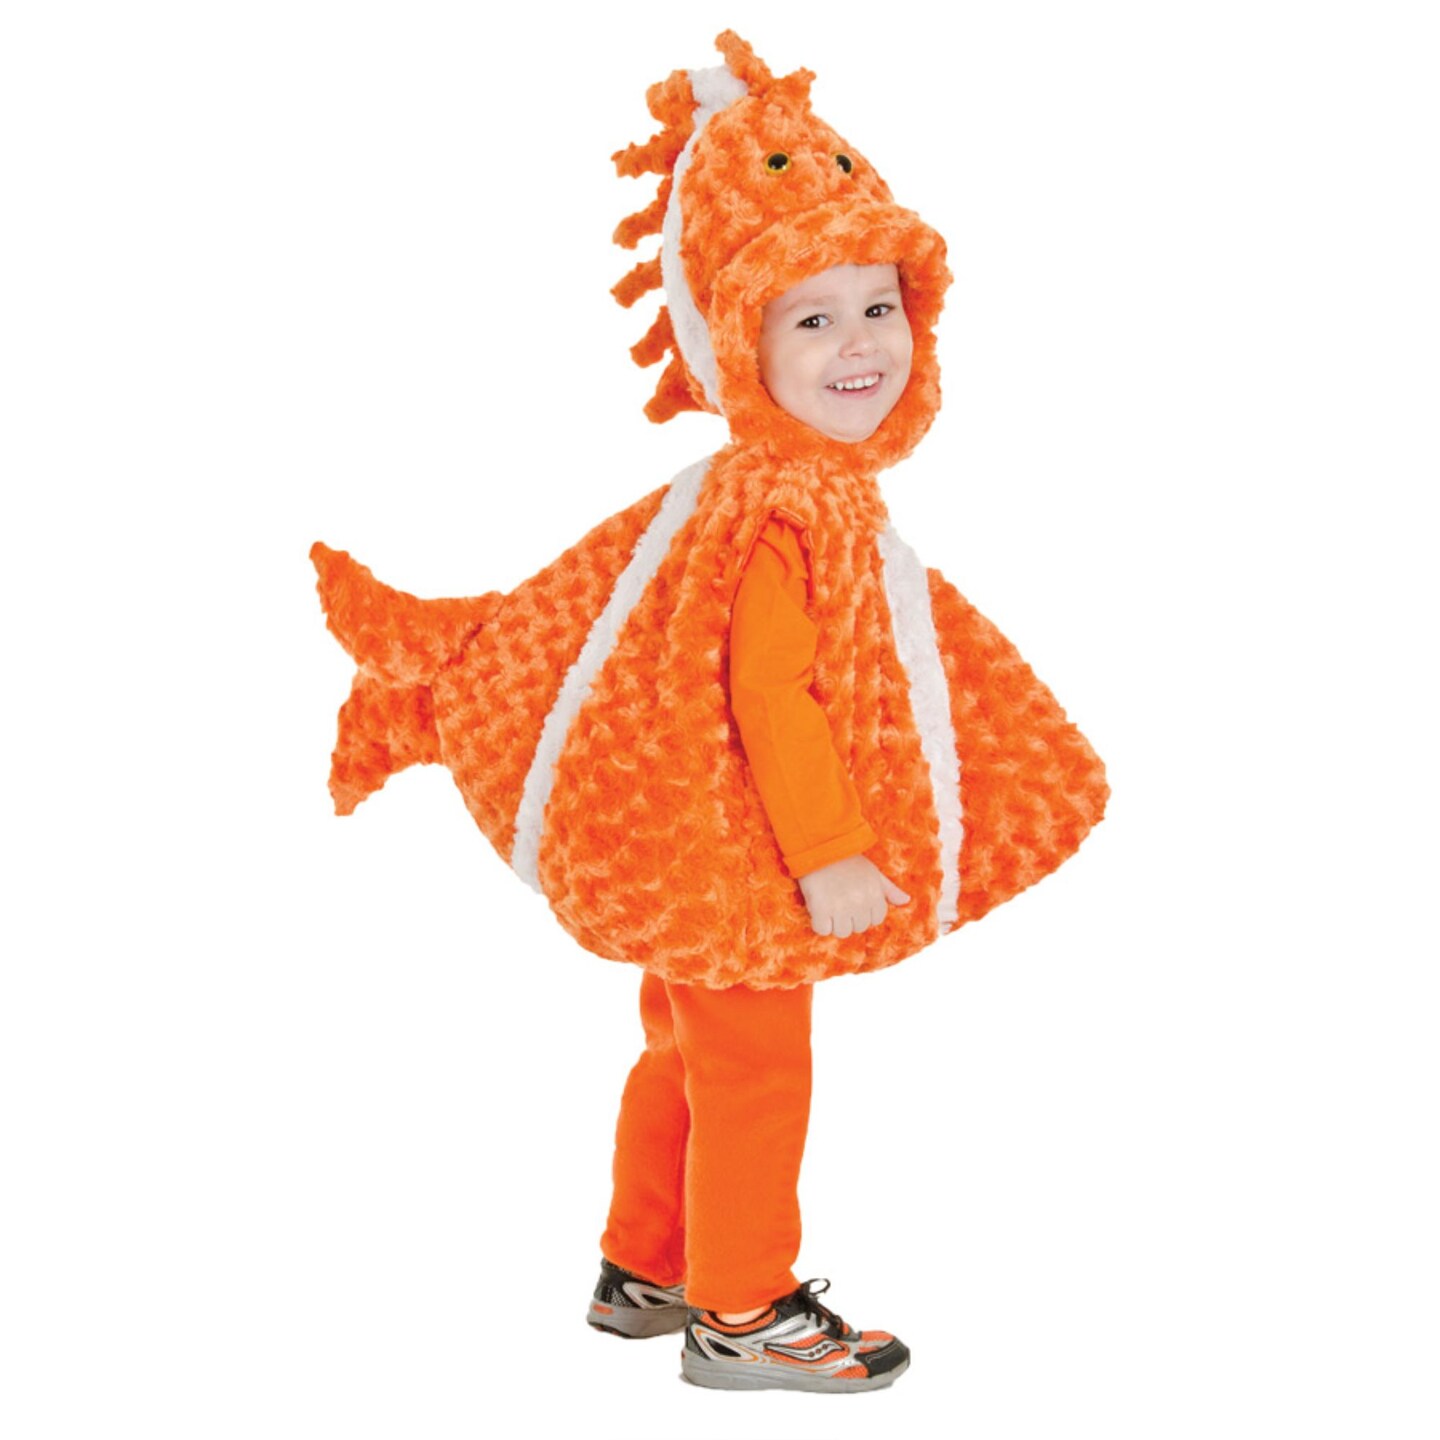 The Costume Center Orange and White Big Mouth Clown Fish Toddler Halloween  Costume - Small